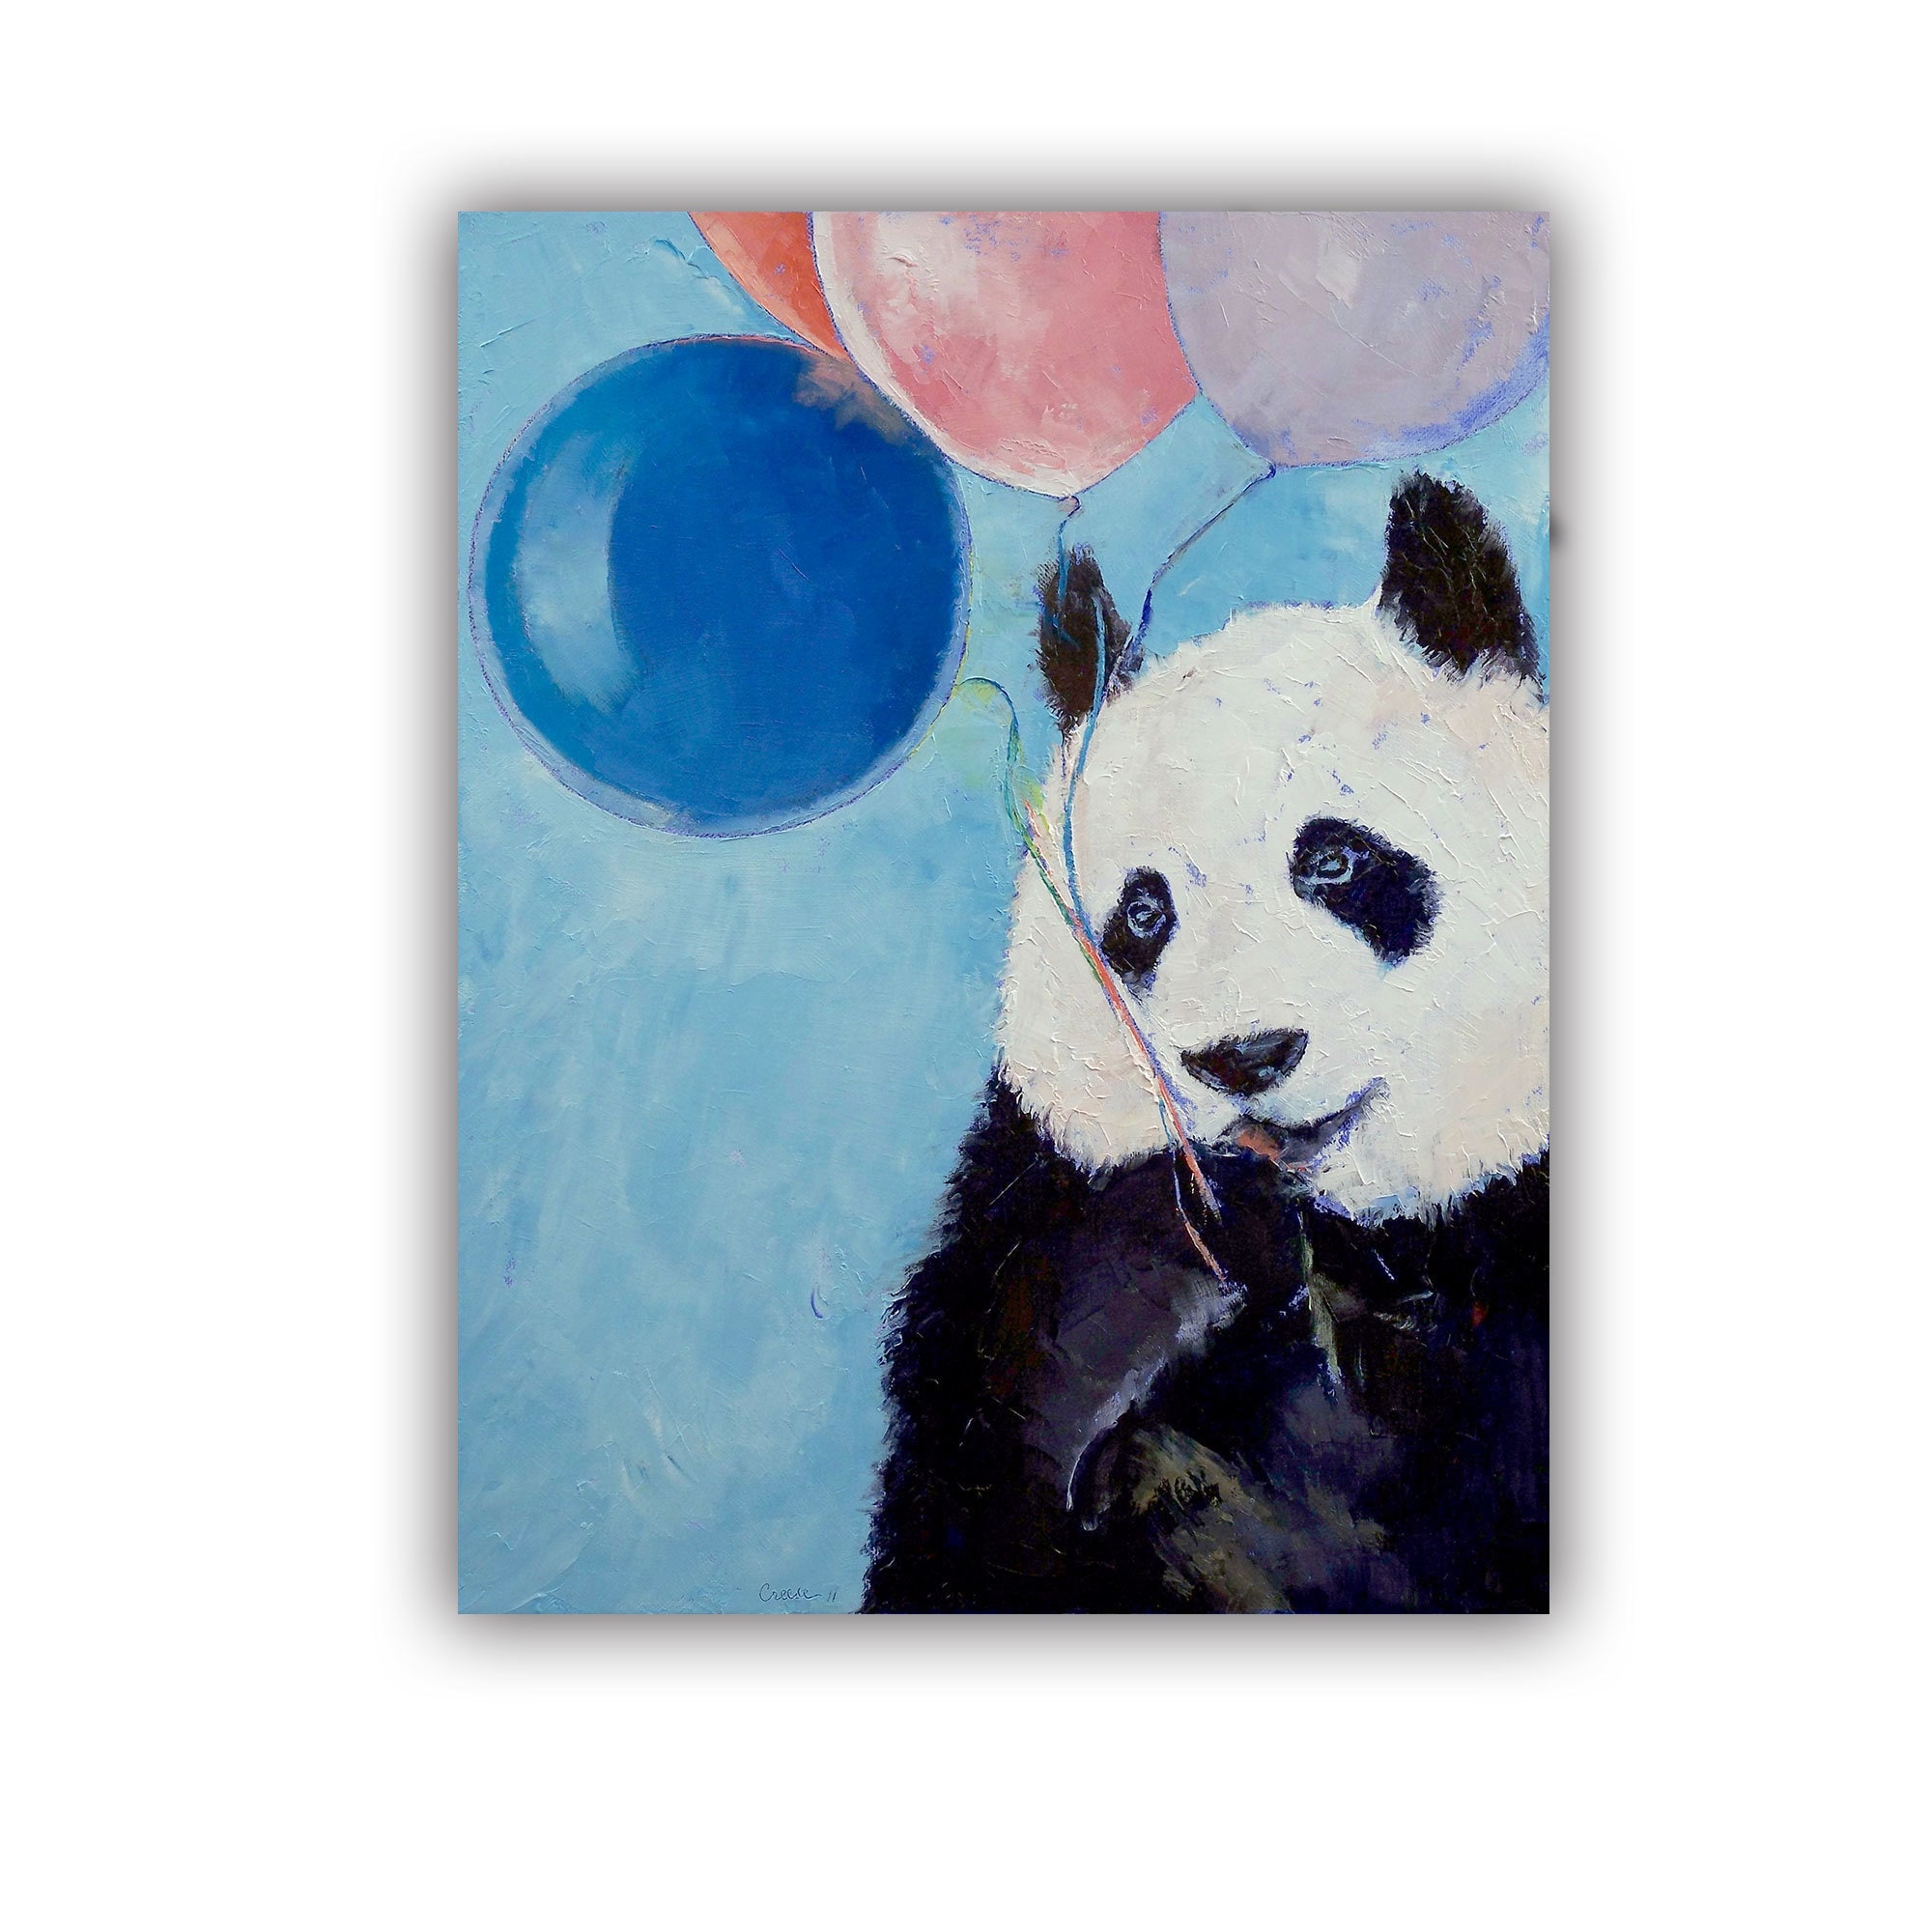 ArtWall Michael Creeses Panda Art Appeelz Removable Wall Art Graphic 36 by 36 